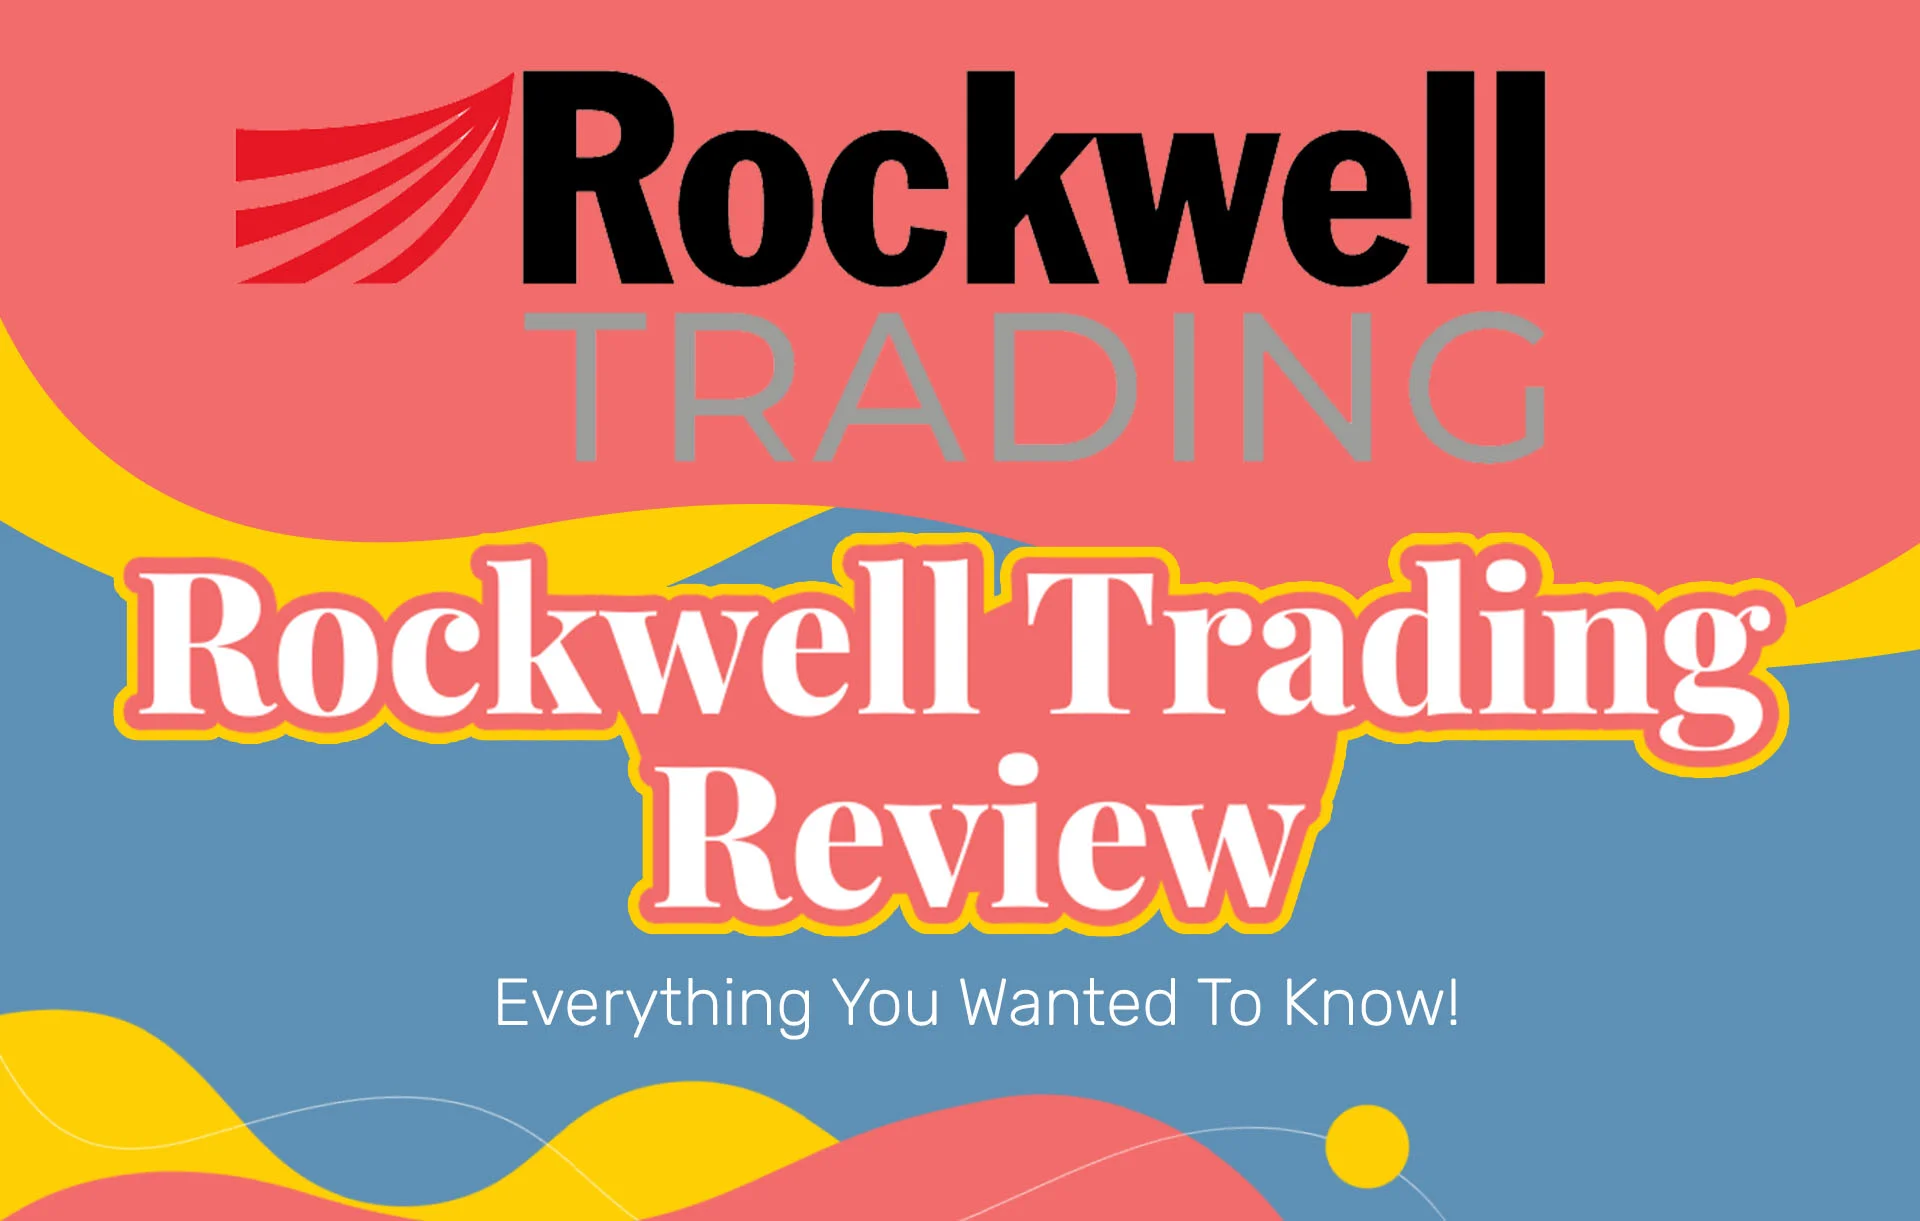 Rockwell Trading Reviews: Everything You Wanted To Know!